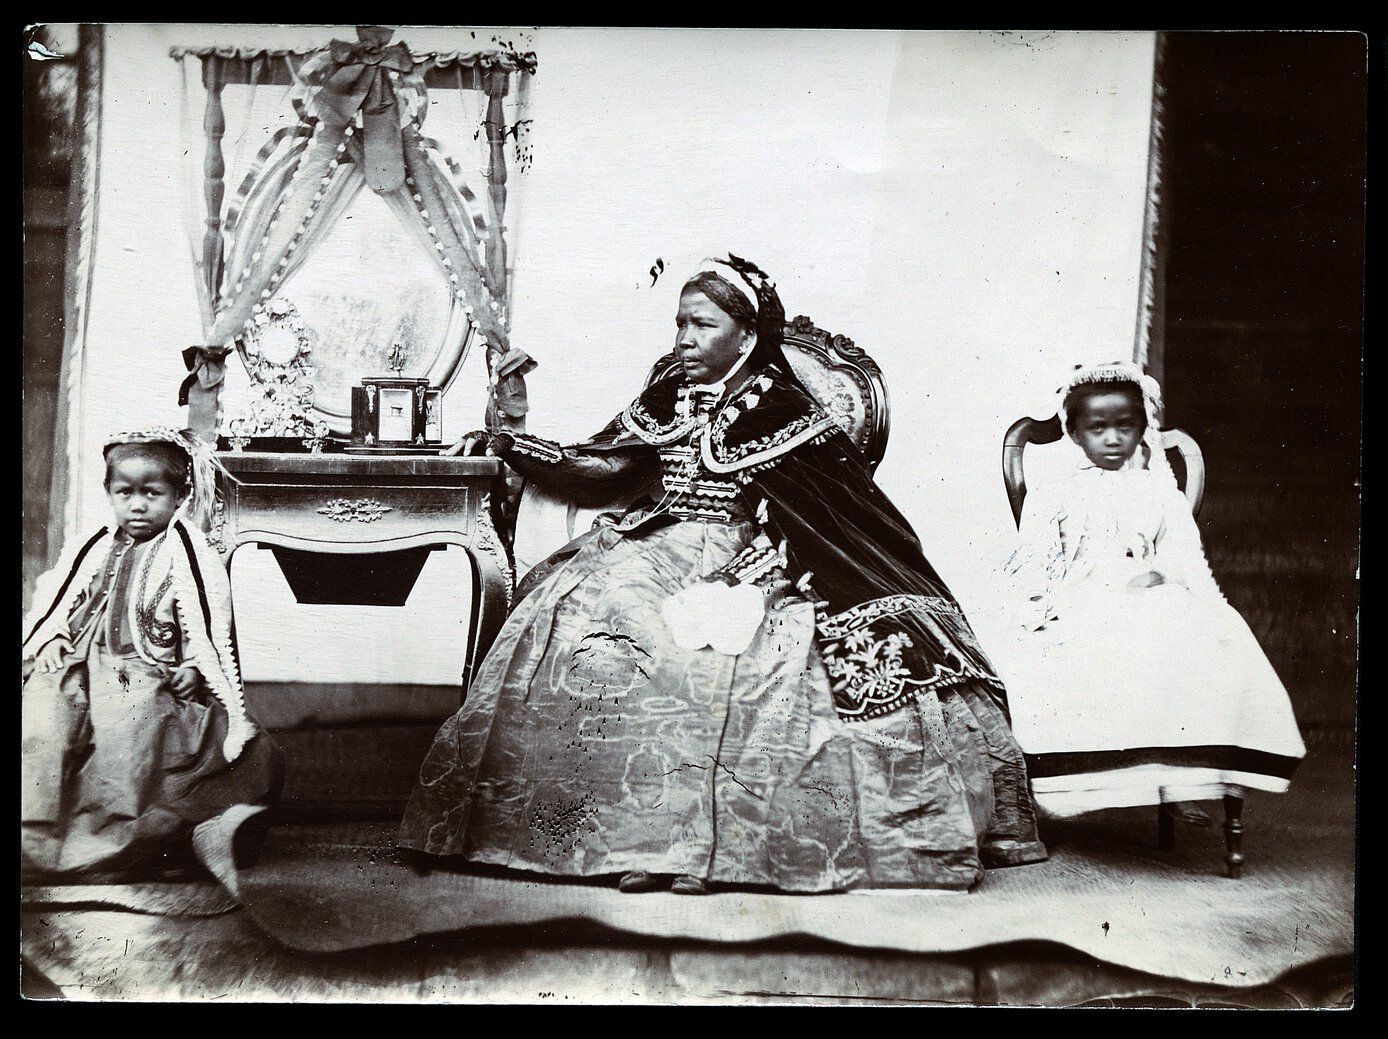 Ranavalona II in regal attire, seated, looking right, beside a table and mirror with two children.